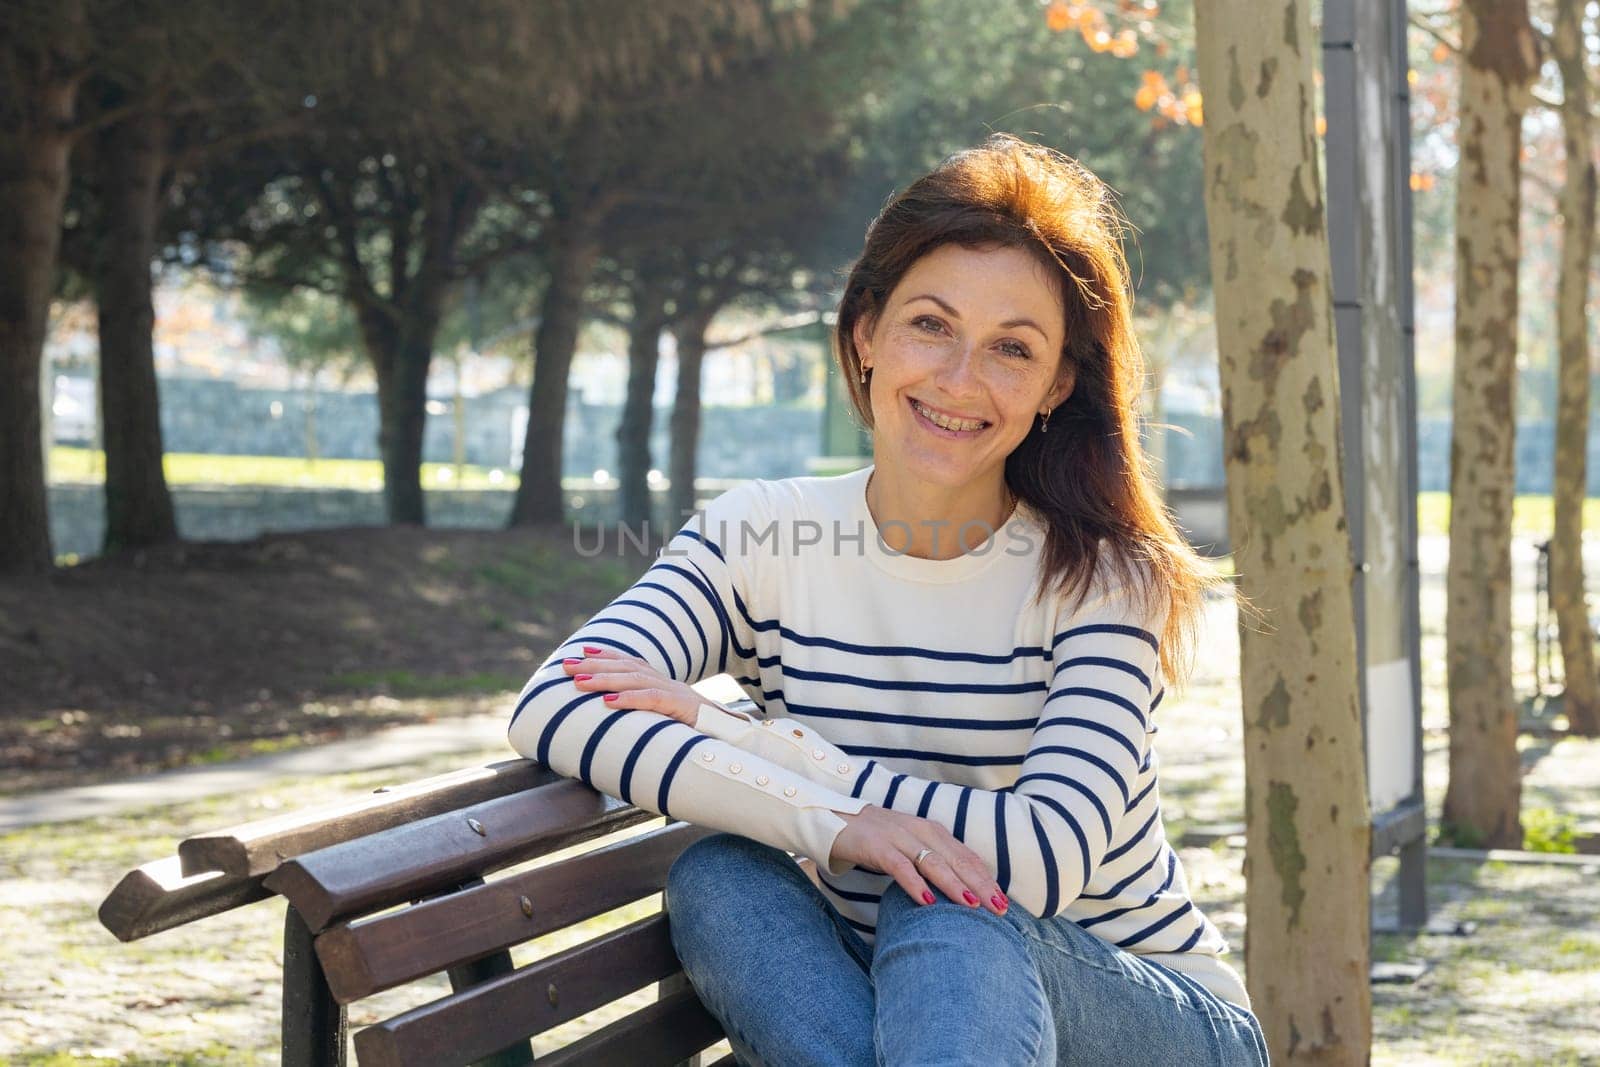 A woman wearing dentistry braces is sitting on a bench in a park. She is smiling and wearing a striped shirt